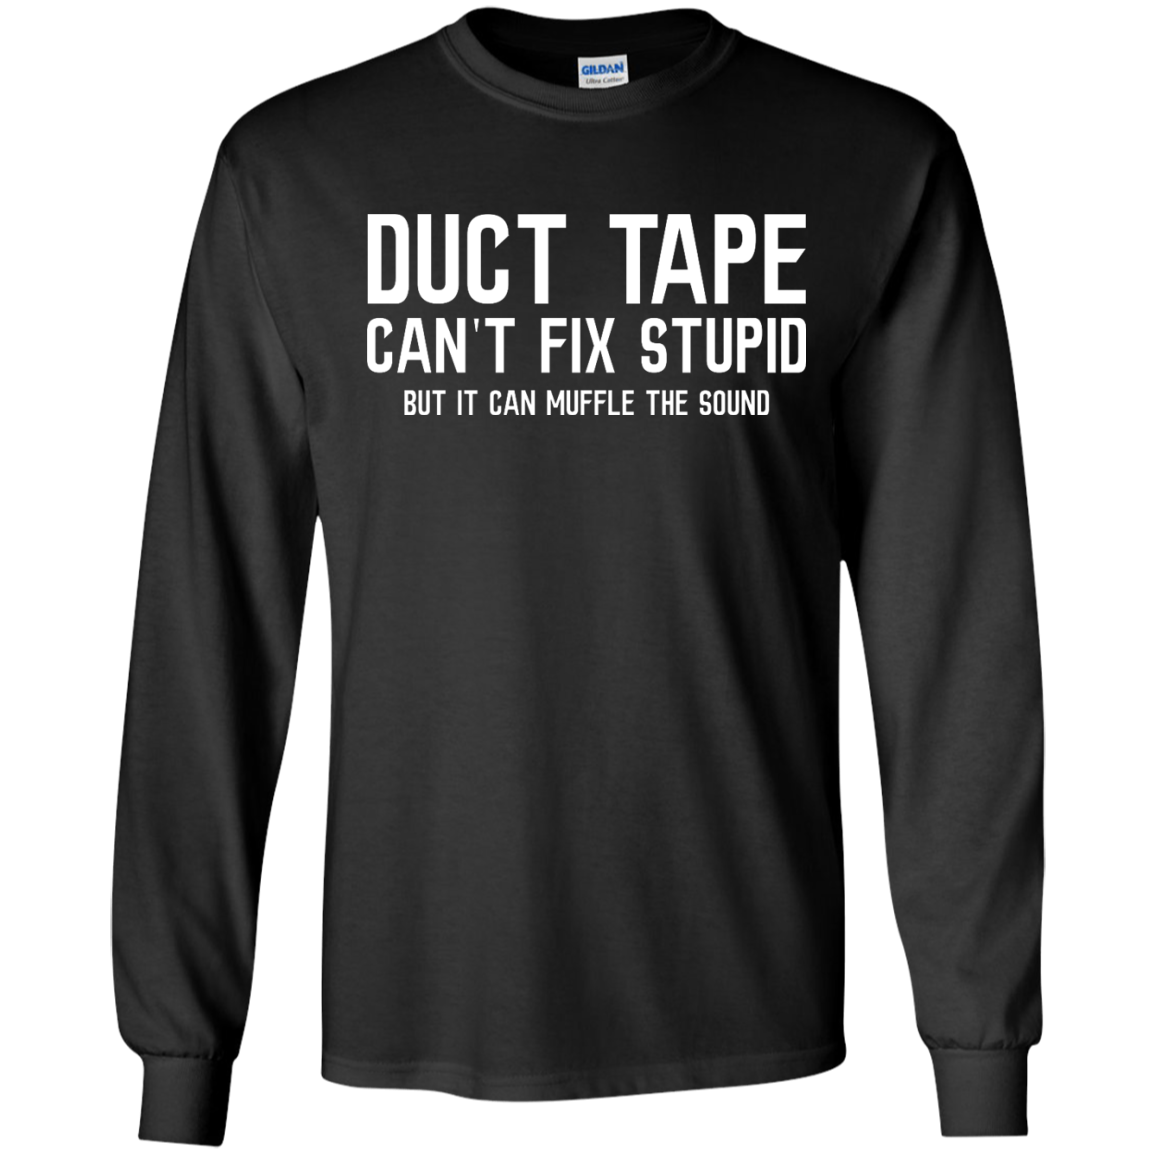 Duck tape can't fix stupid, but it can muffle the sound shirt, hoodie,